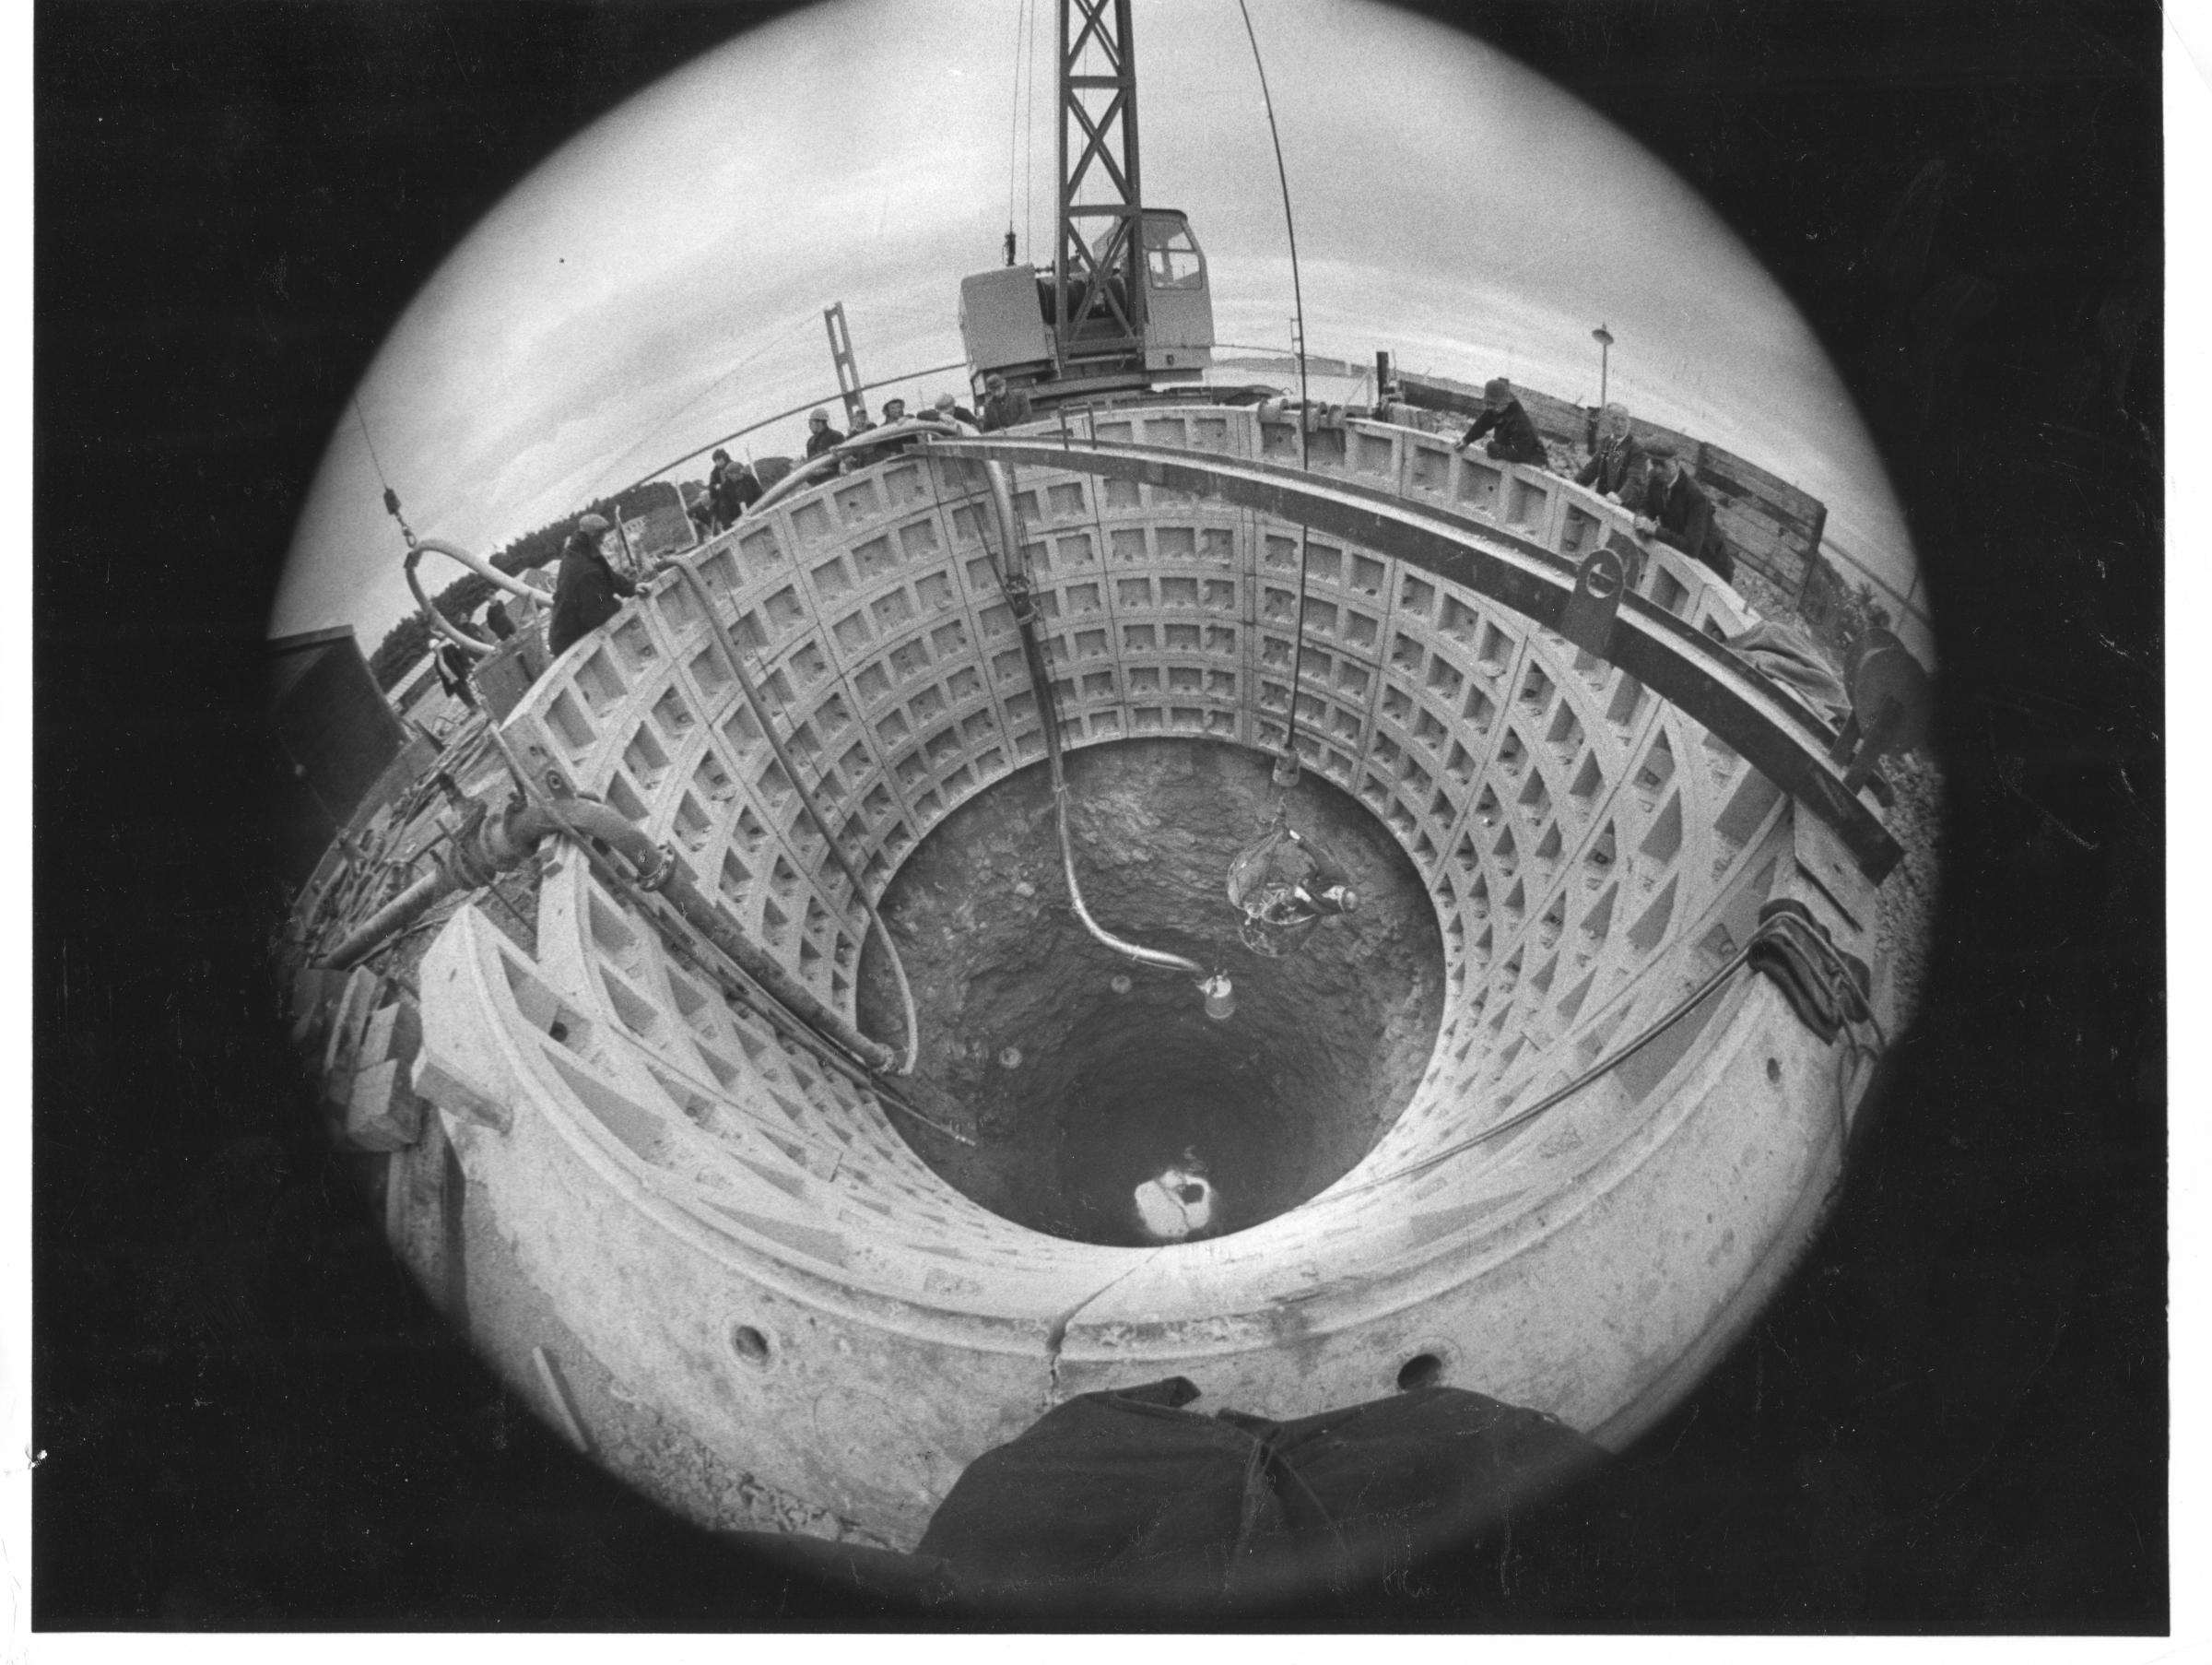 View down the 20ft diameter shaft at Beachley for the 4.5 kilometre 400 kV cable tunnel under the Rivers Severn and Wye